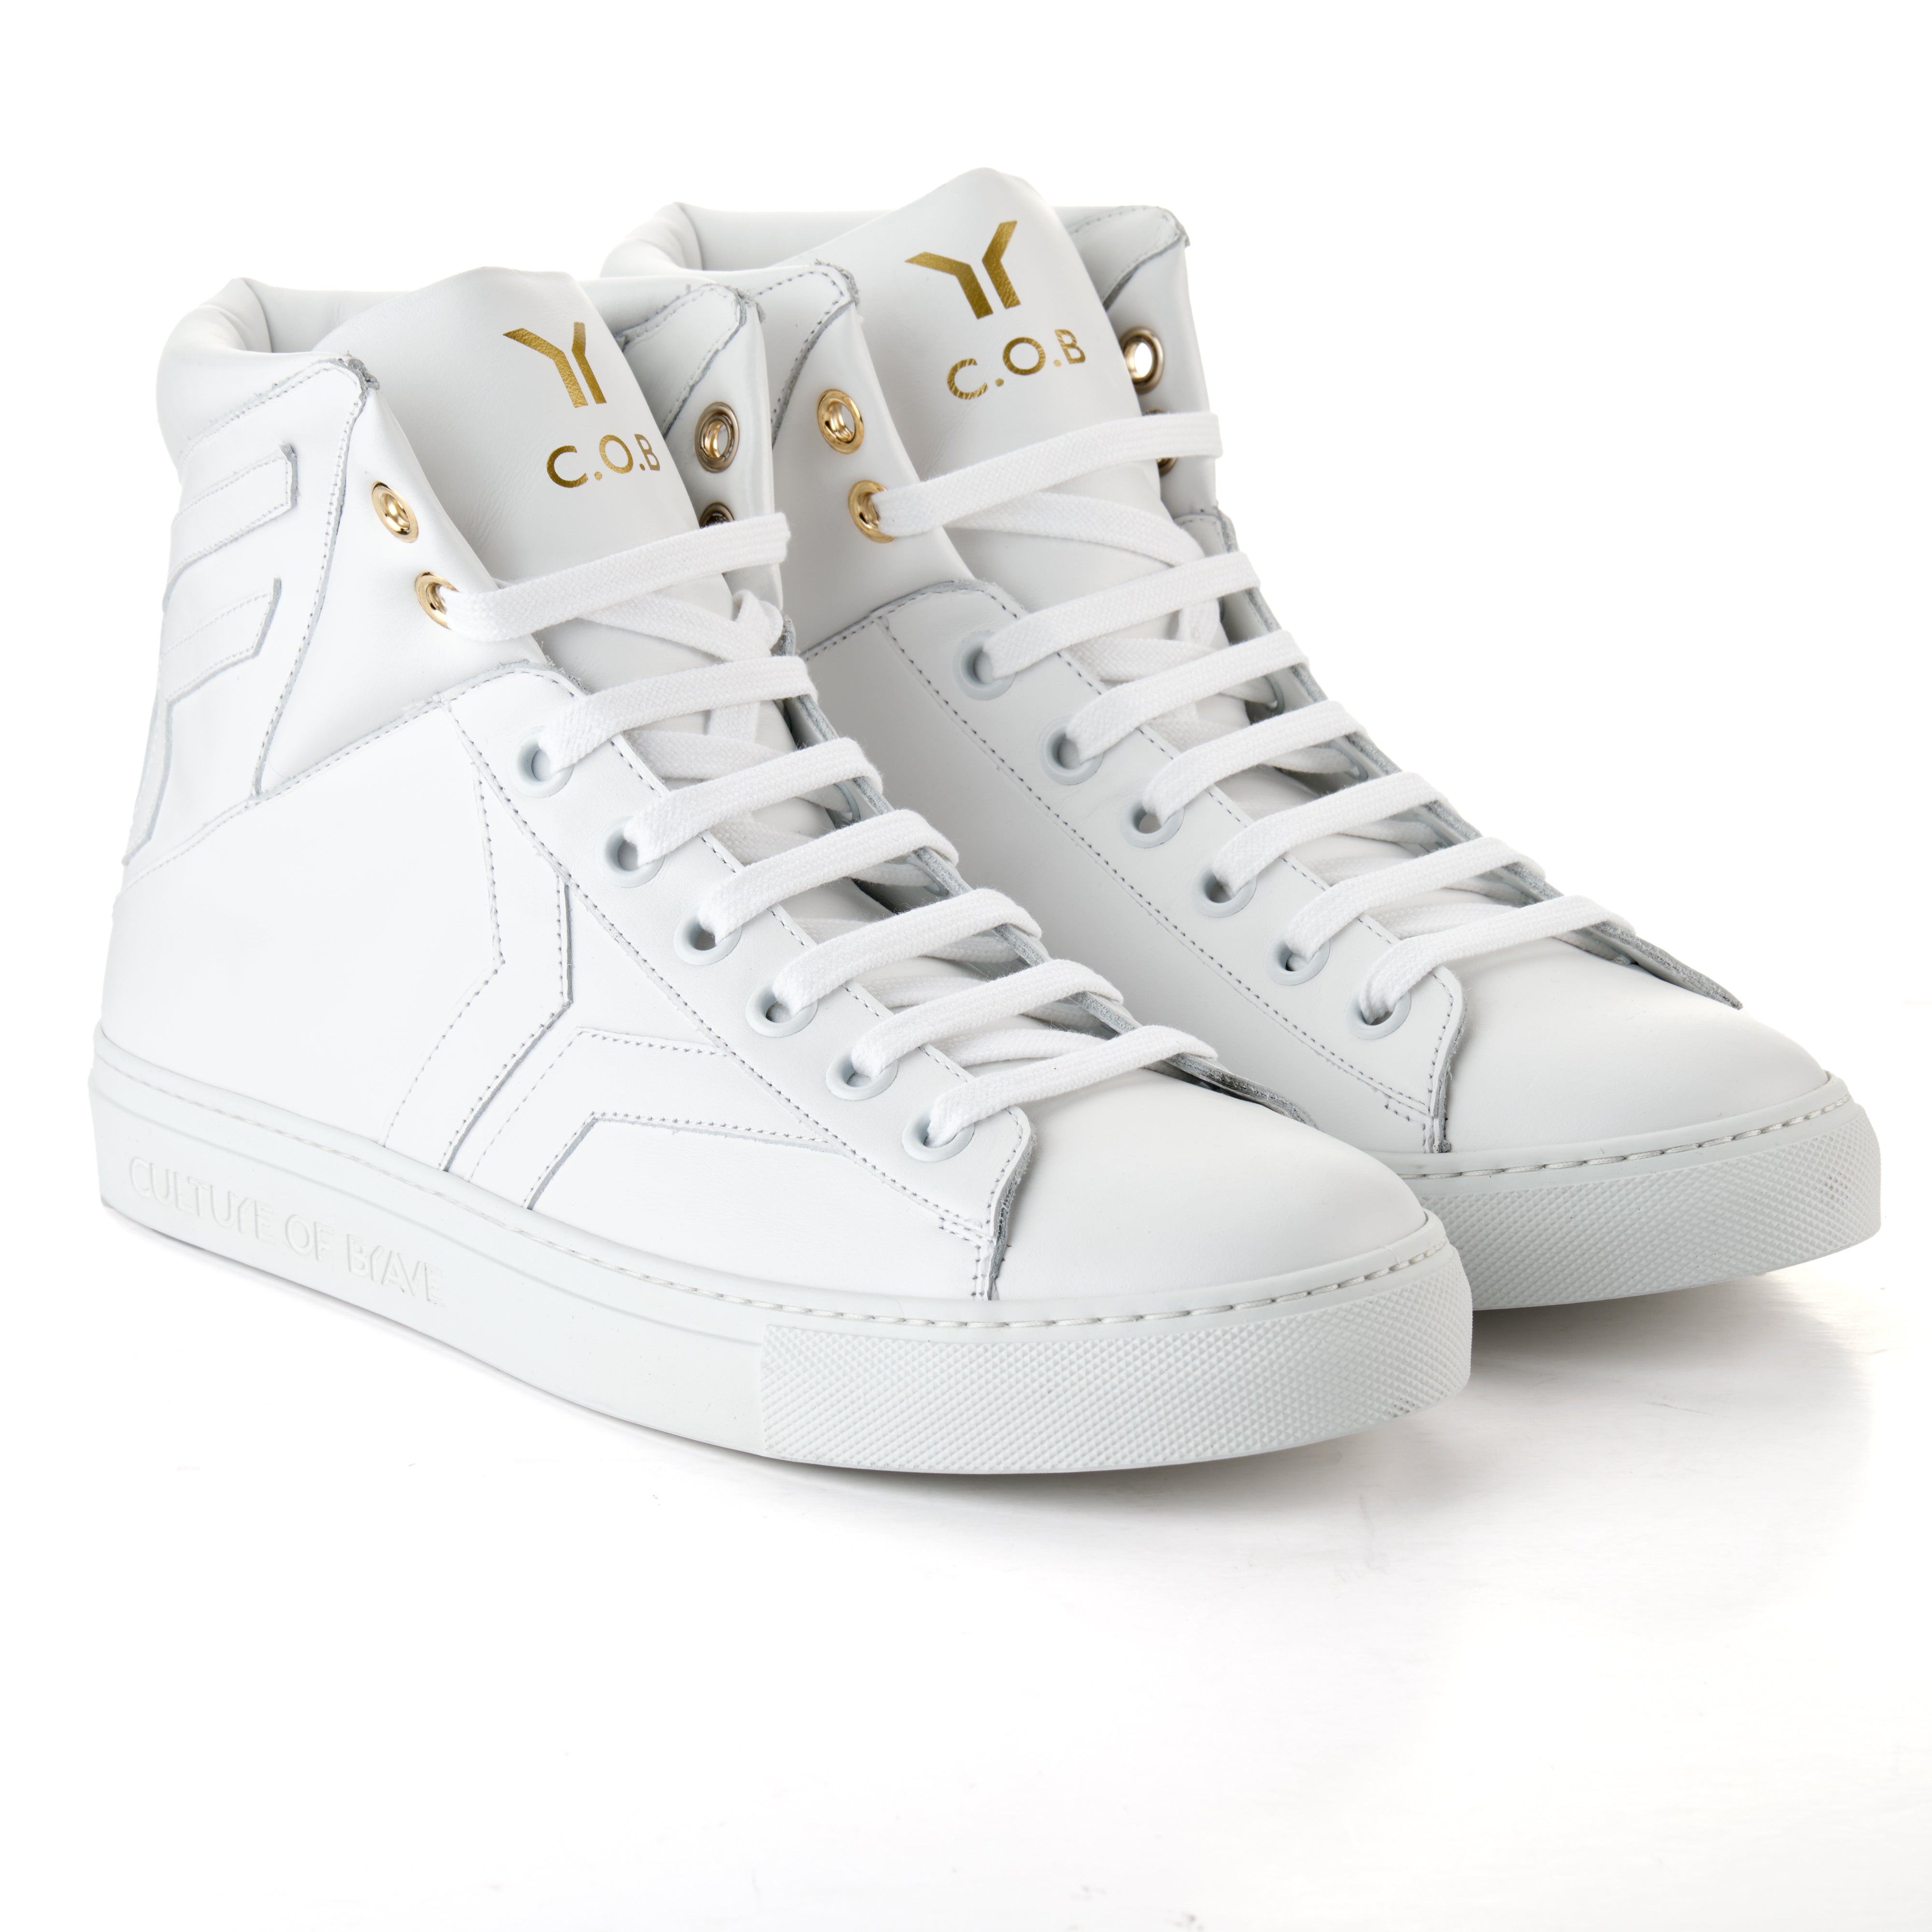 Prepared to Risk S20 Men White leather white wing high cut